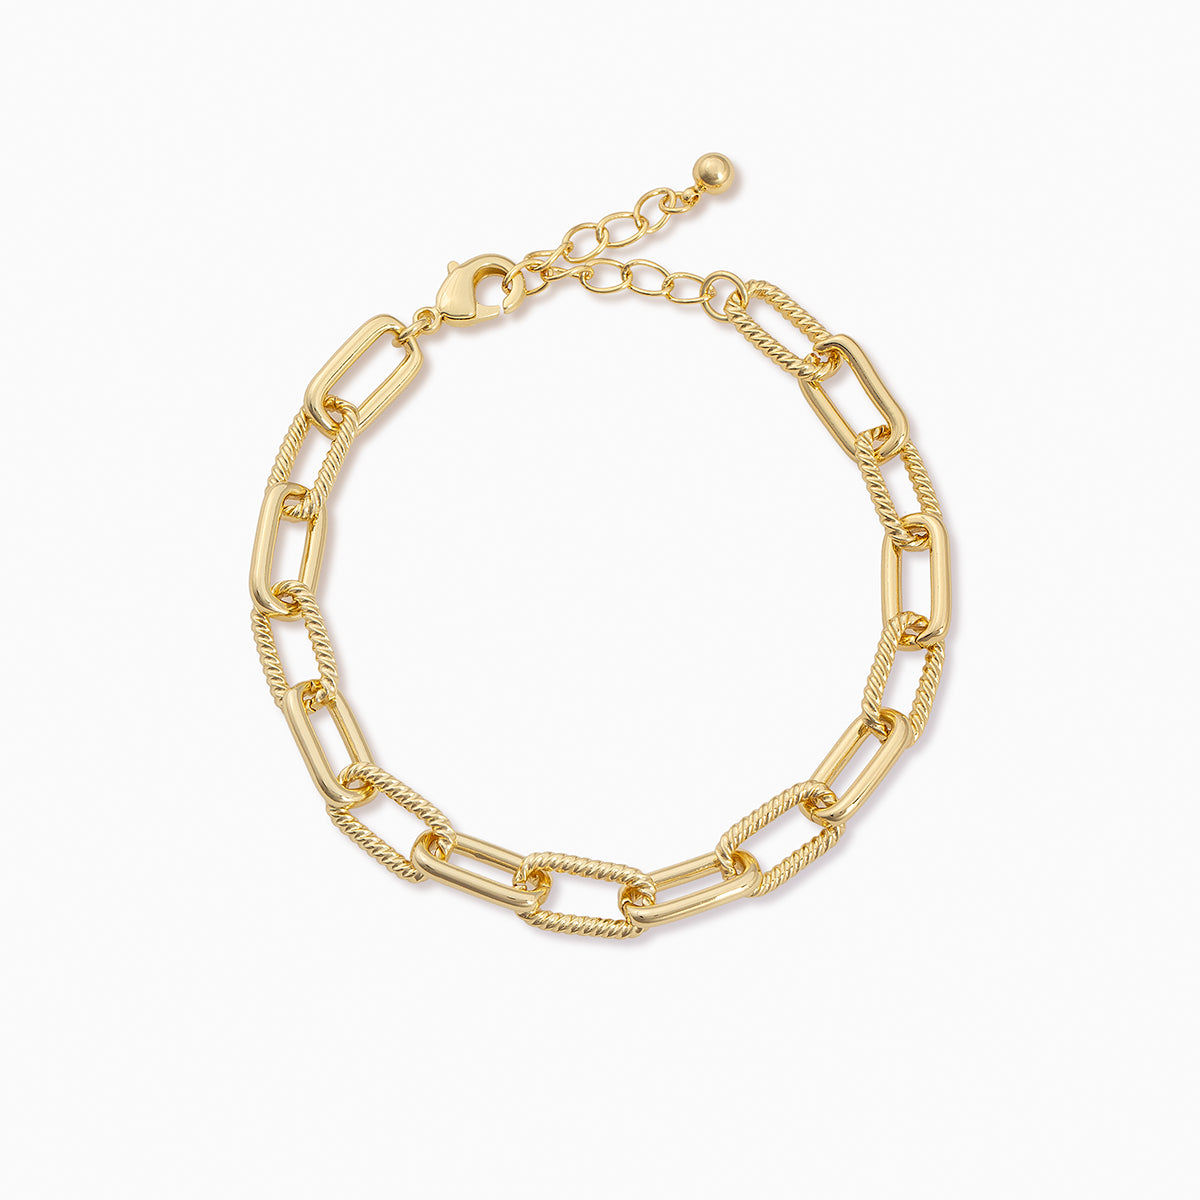 Linked Everyday Chain Bracelet in Gold | Uncommon James